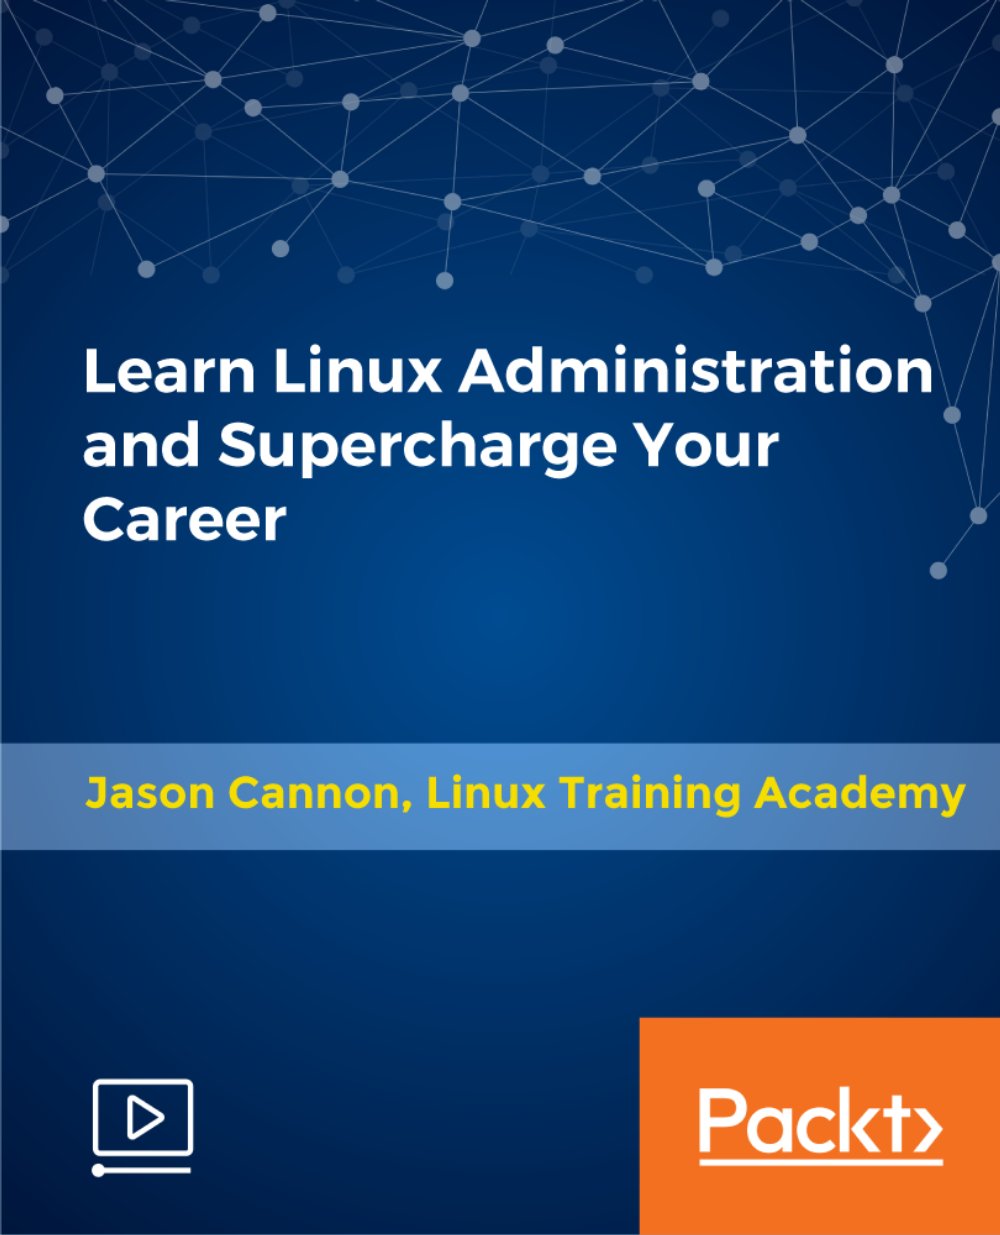 Learn Linux Administration and Supercharge Your Career